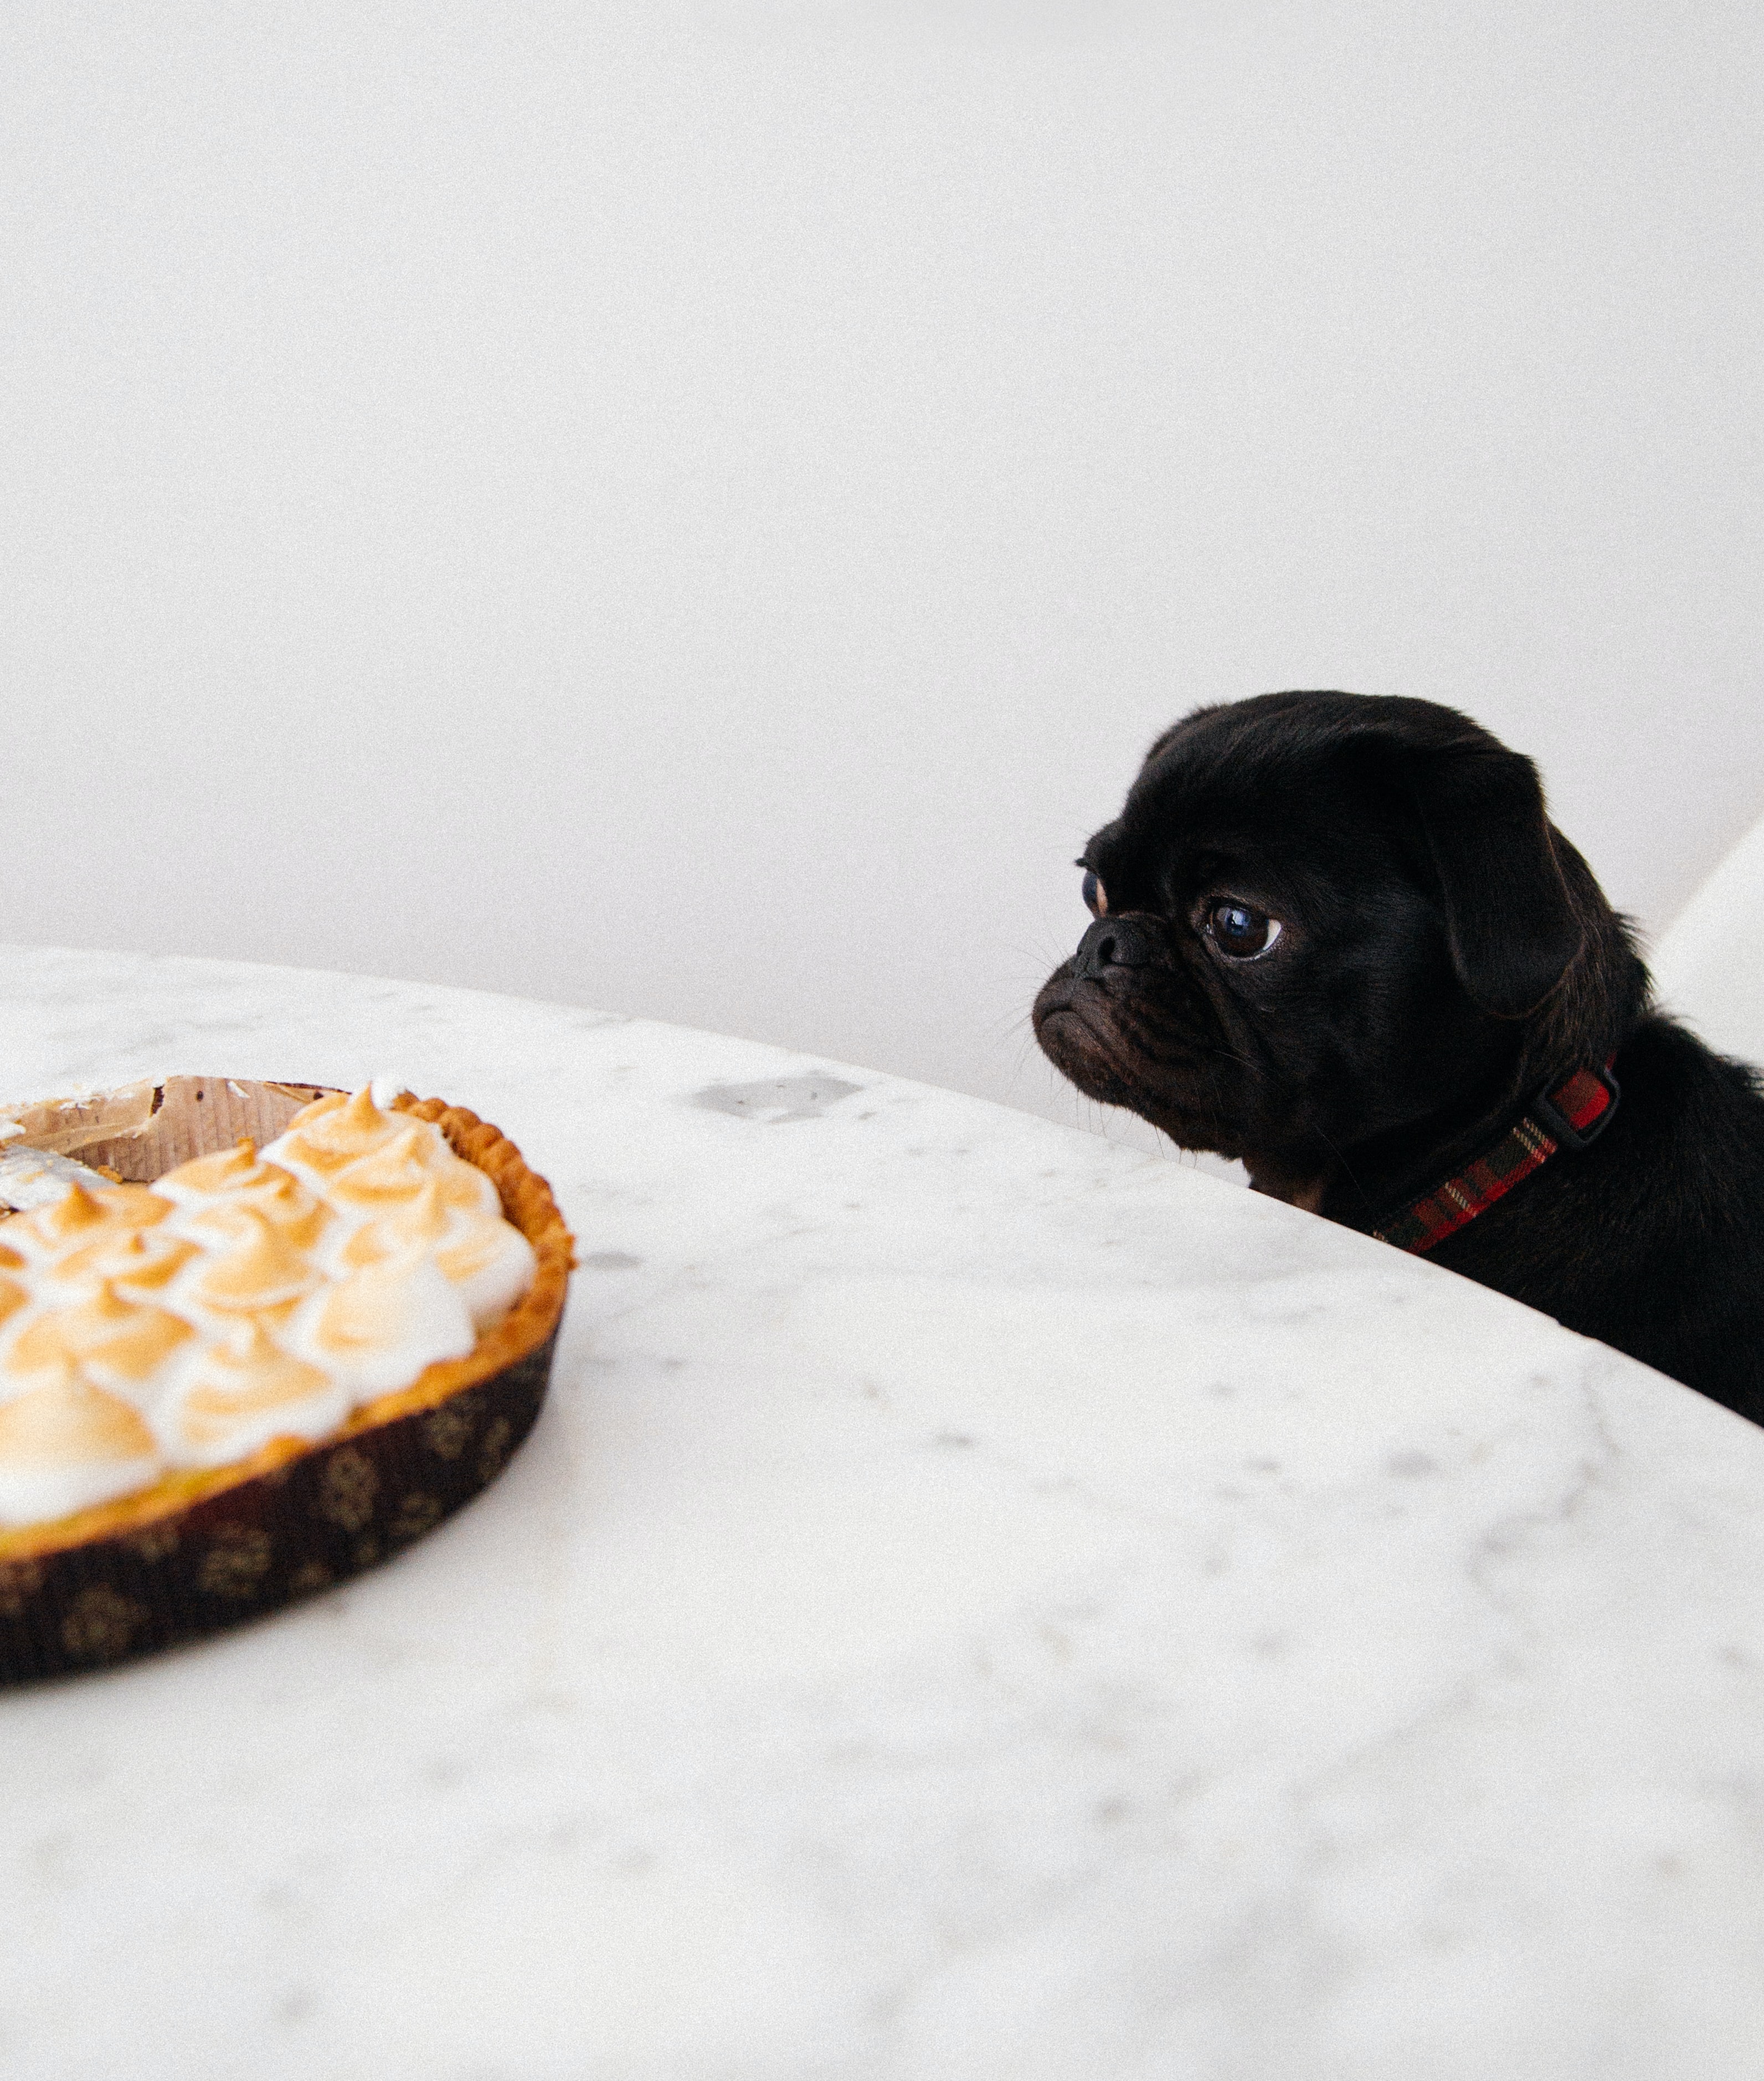 Dog staring at a pie